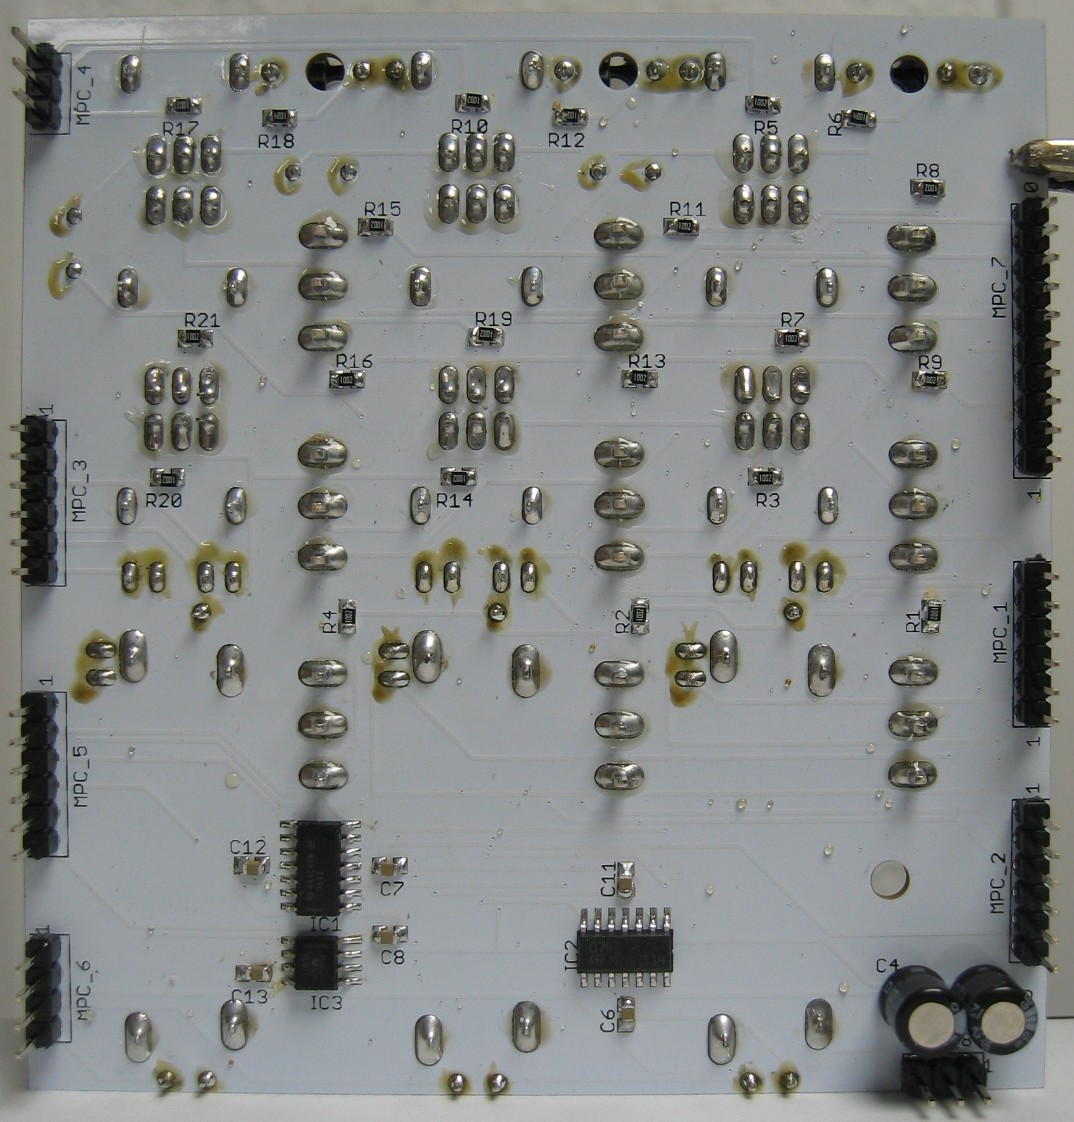 Performance Mixer Channel populated control PCB back